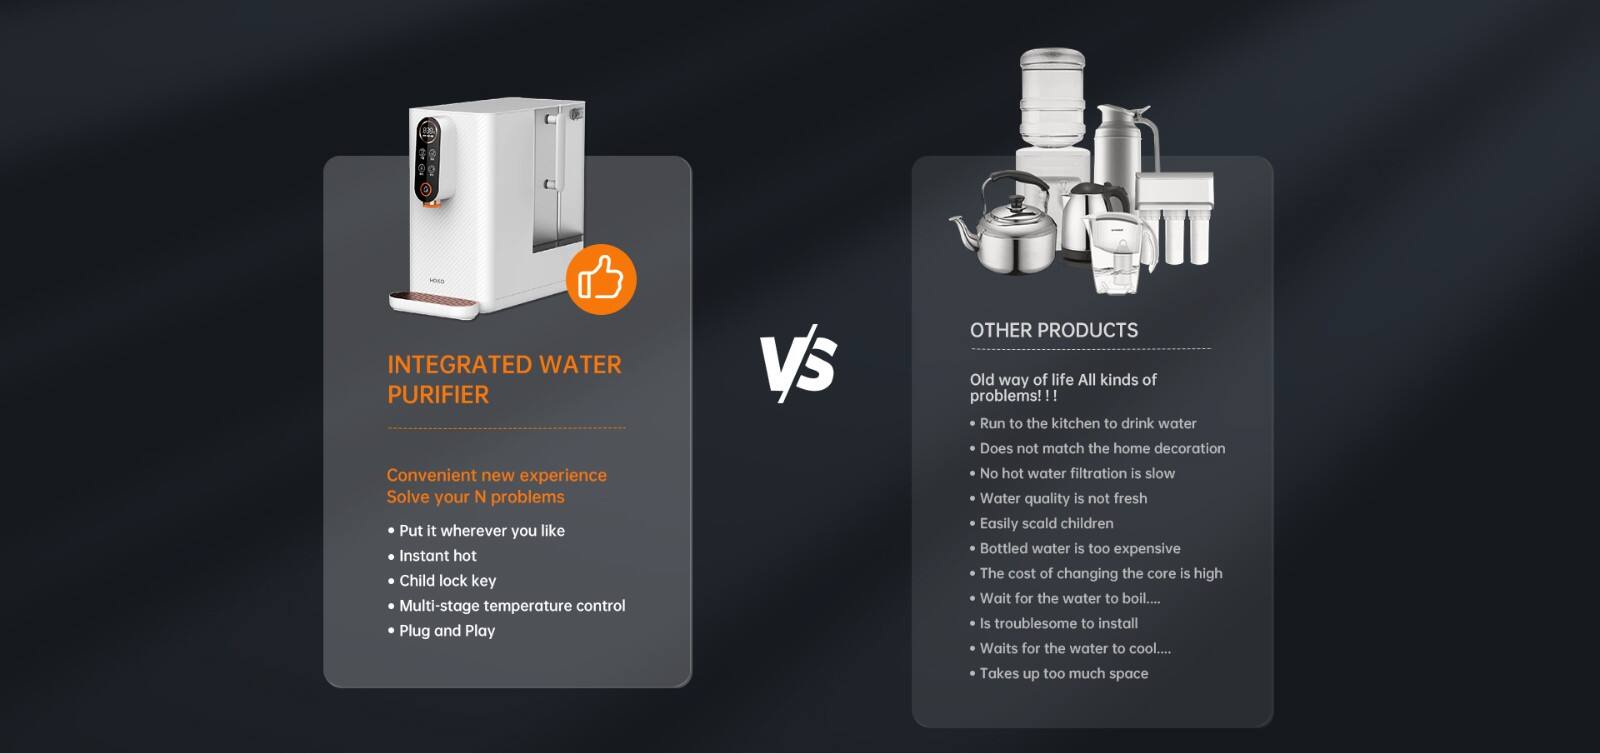 SJ100R-A03 Countertop Reverse Osmosis Water Purifier For Home manufacture